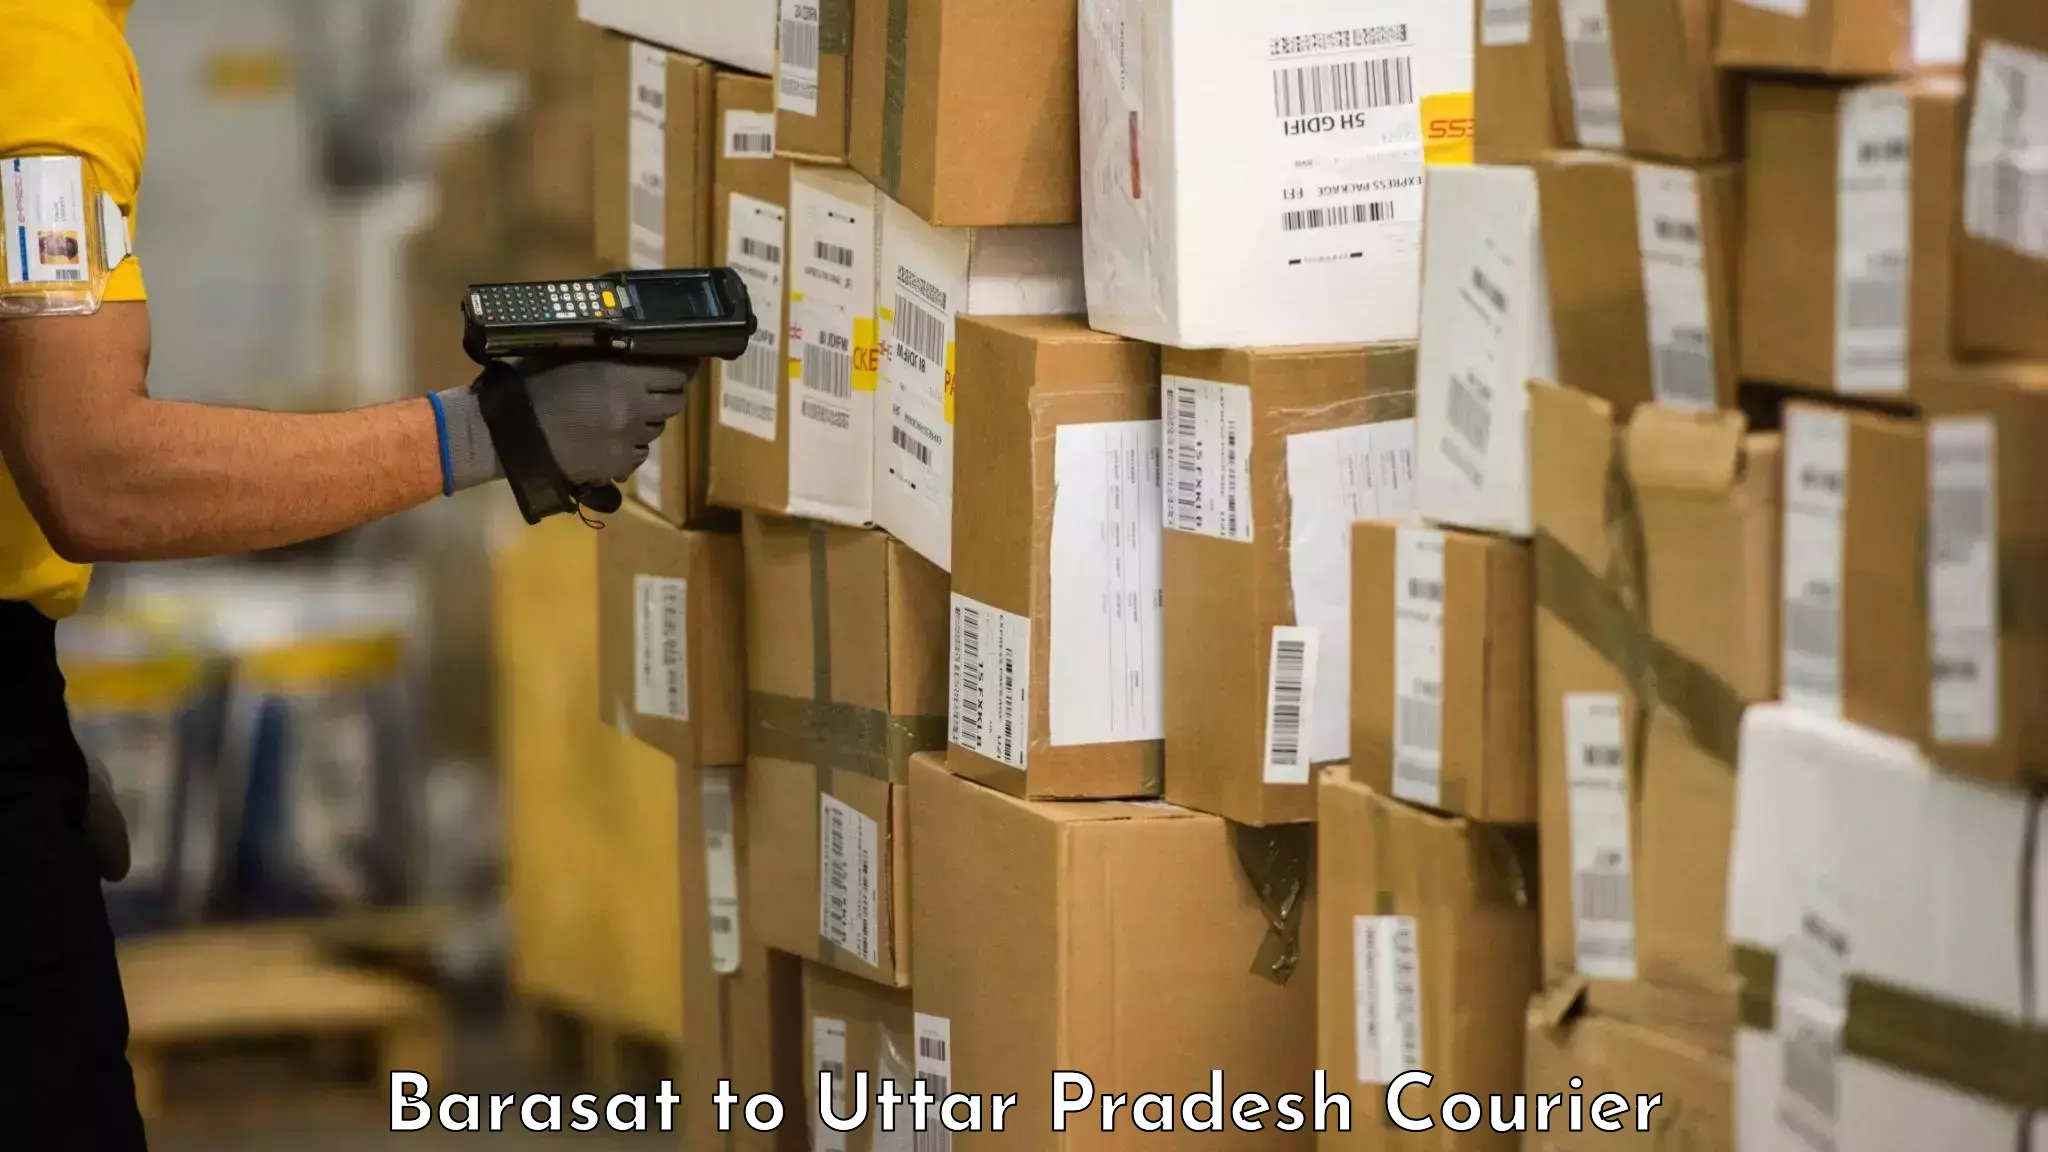 Baggage transport quote Barasat to Hathras